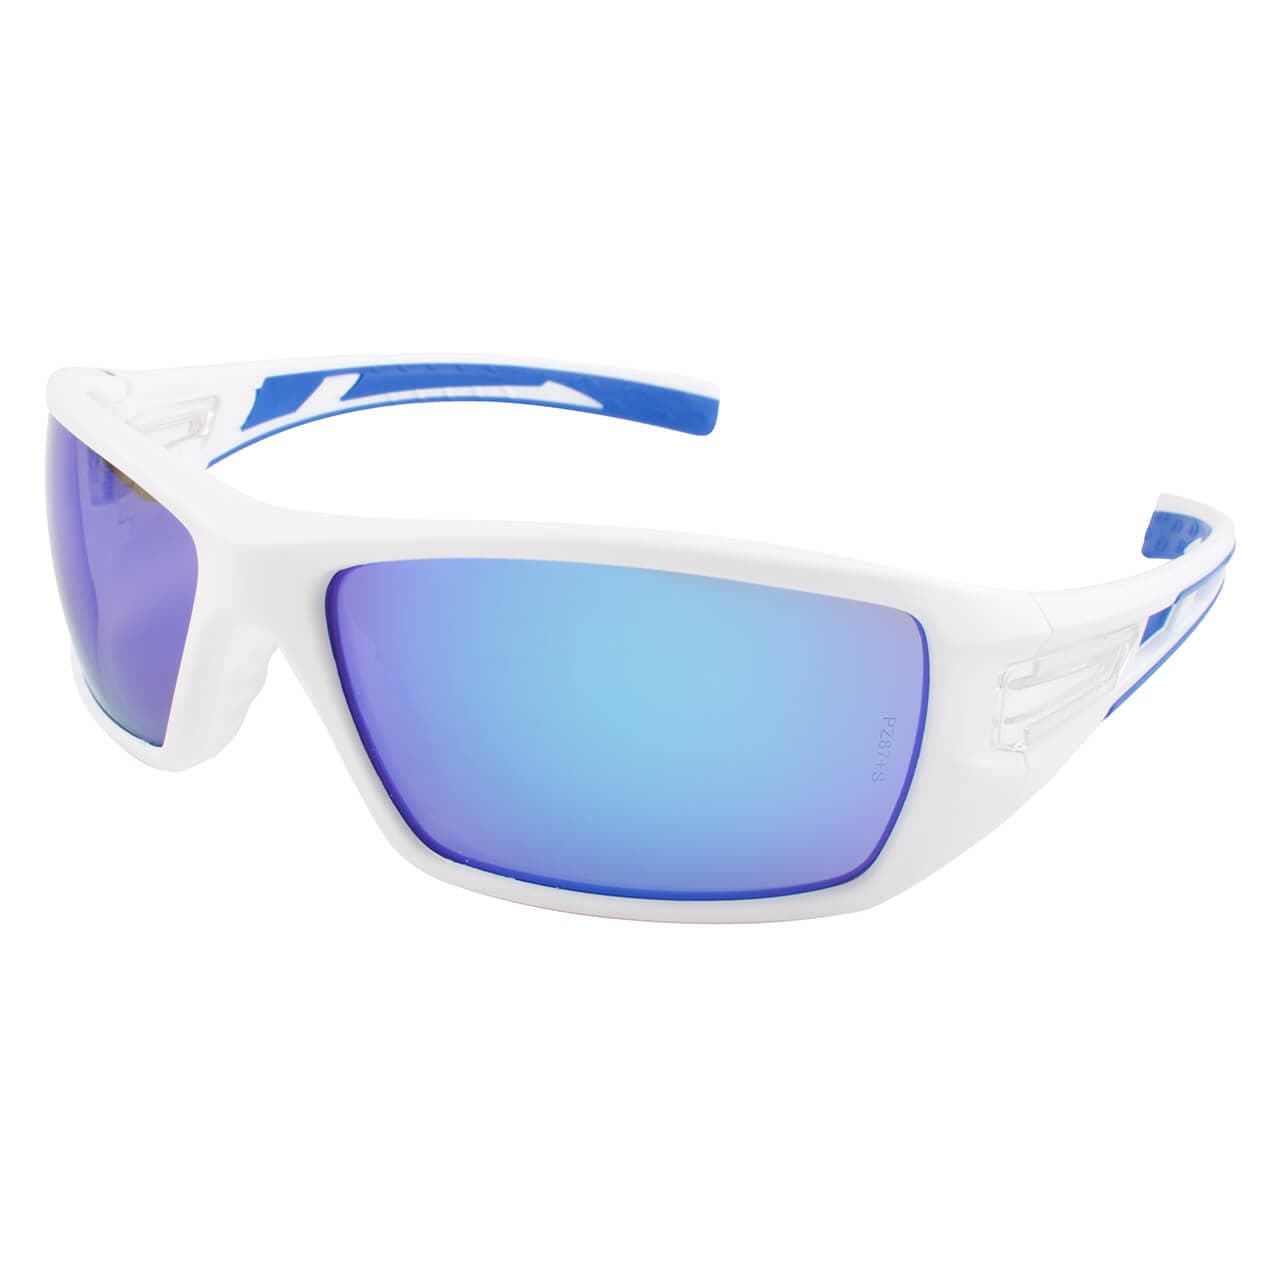 METEL M30 Safety Sunglasses Lightweight Full-Frame, Flexible Temples, Multiple Color Options